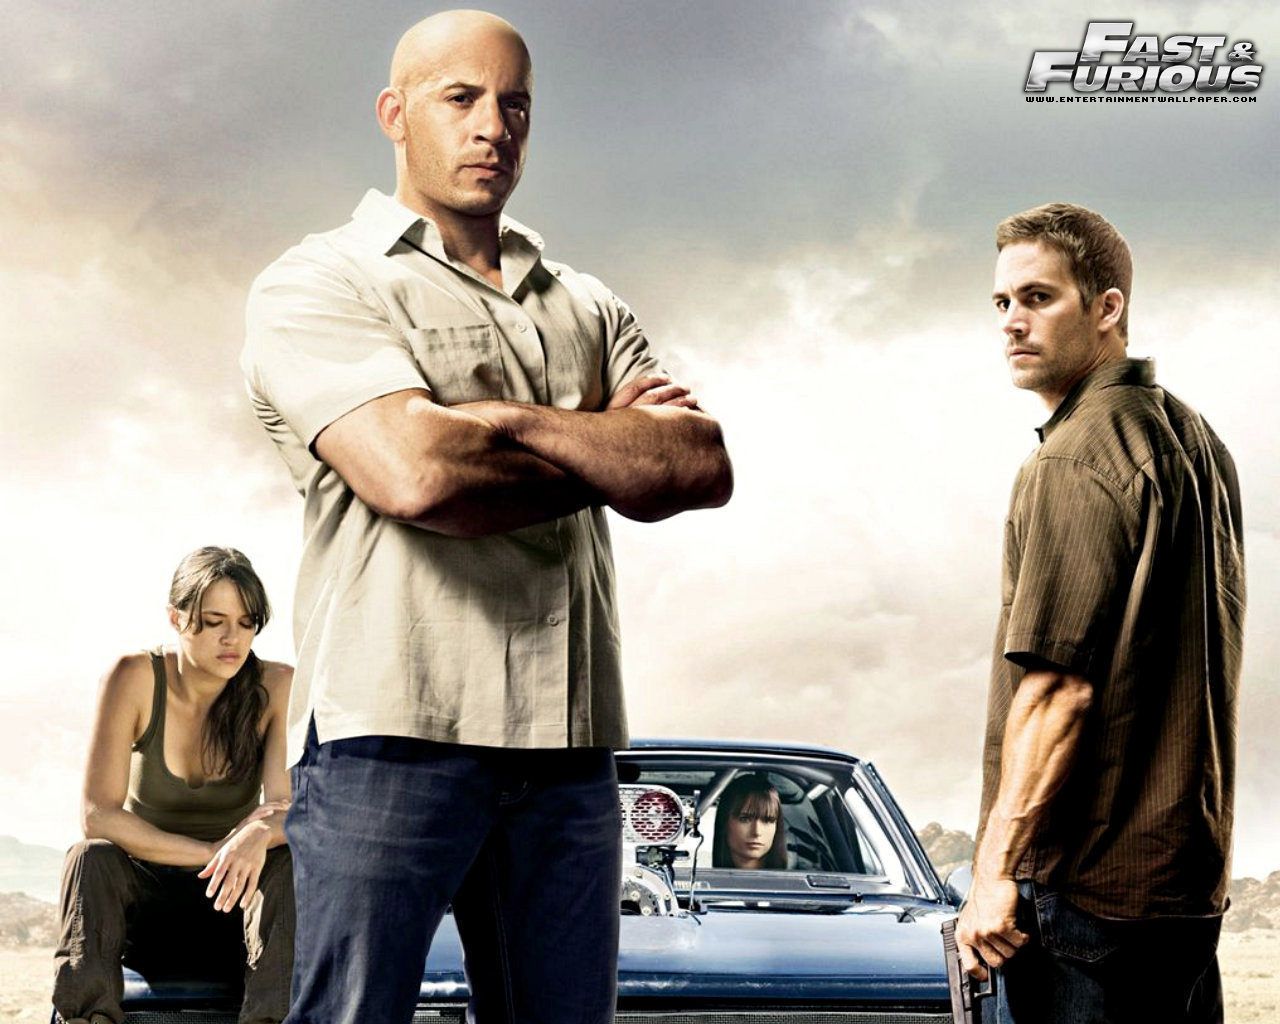 Paul Walker Fast & Furious hd wallpapers ›› Page 0 | ForWallpapers.com